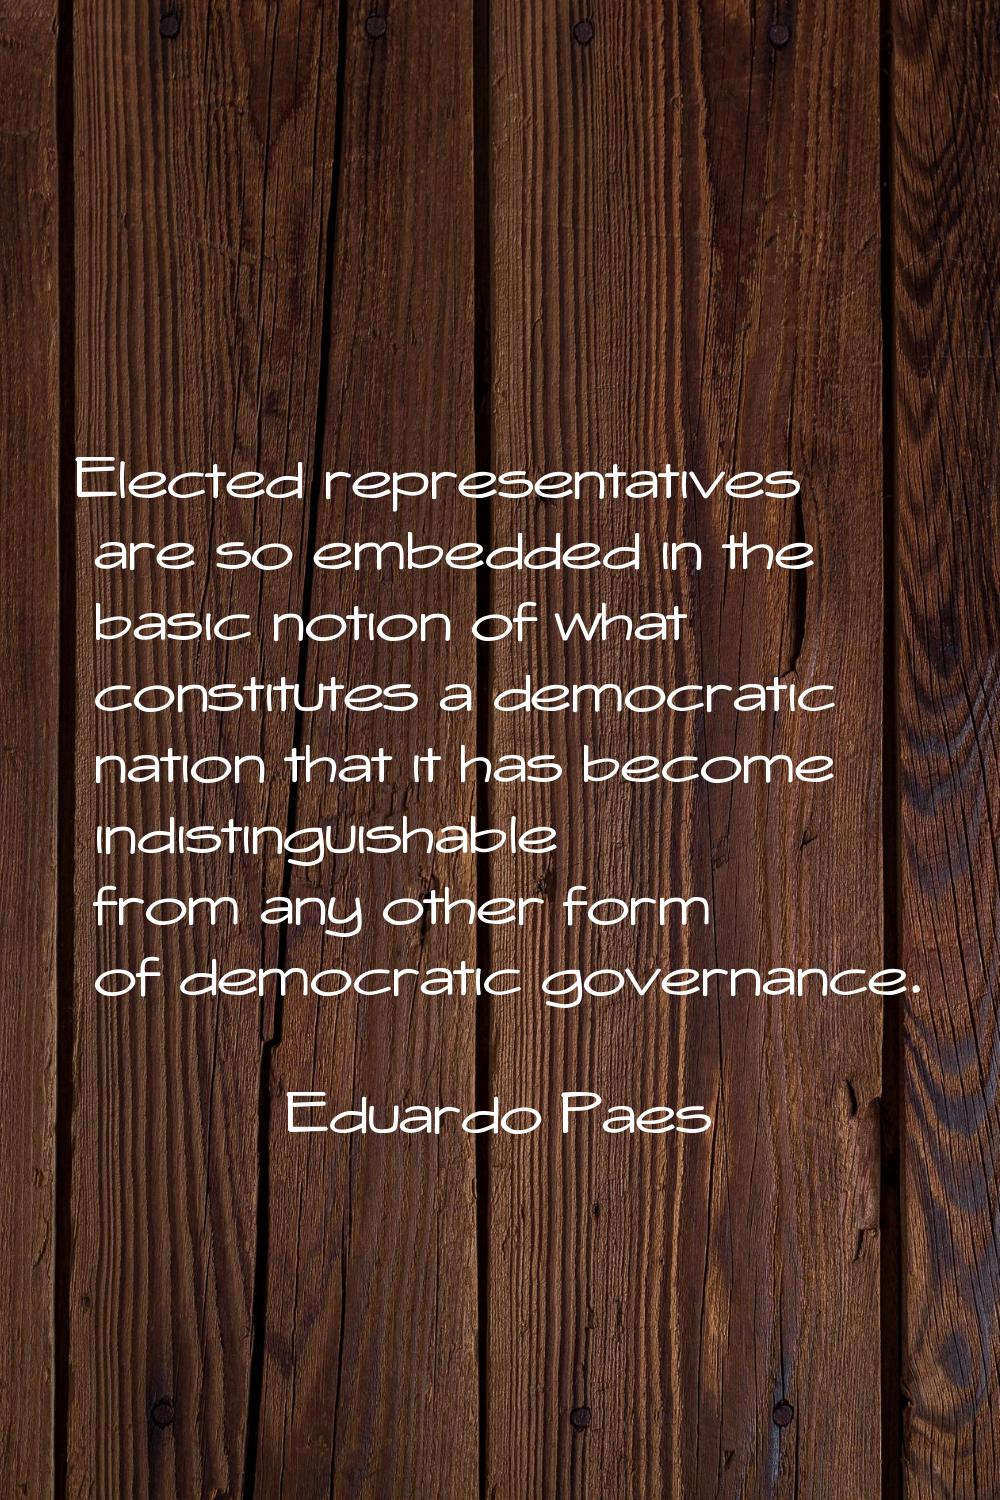 Elected representatives are so embedded in the basic notion of what constitutes a democratic nation